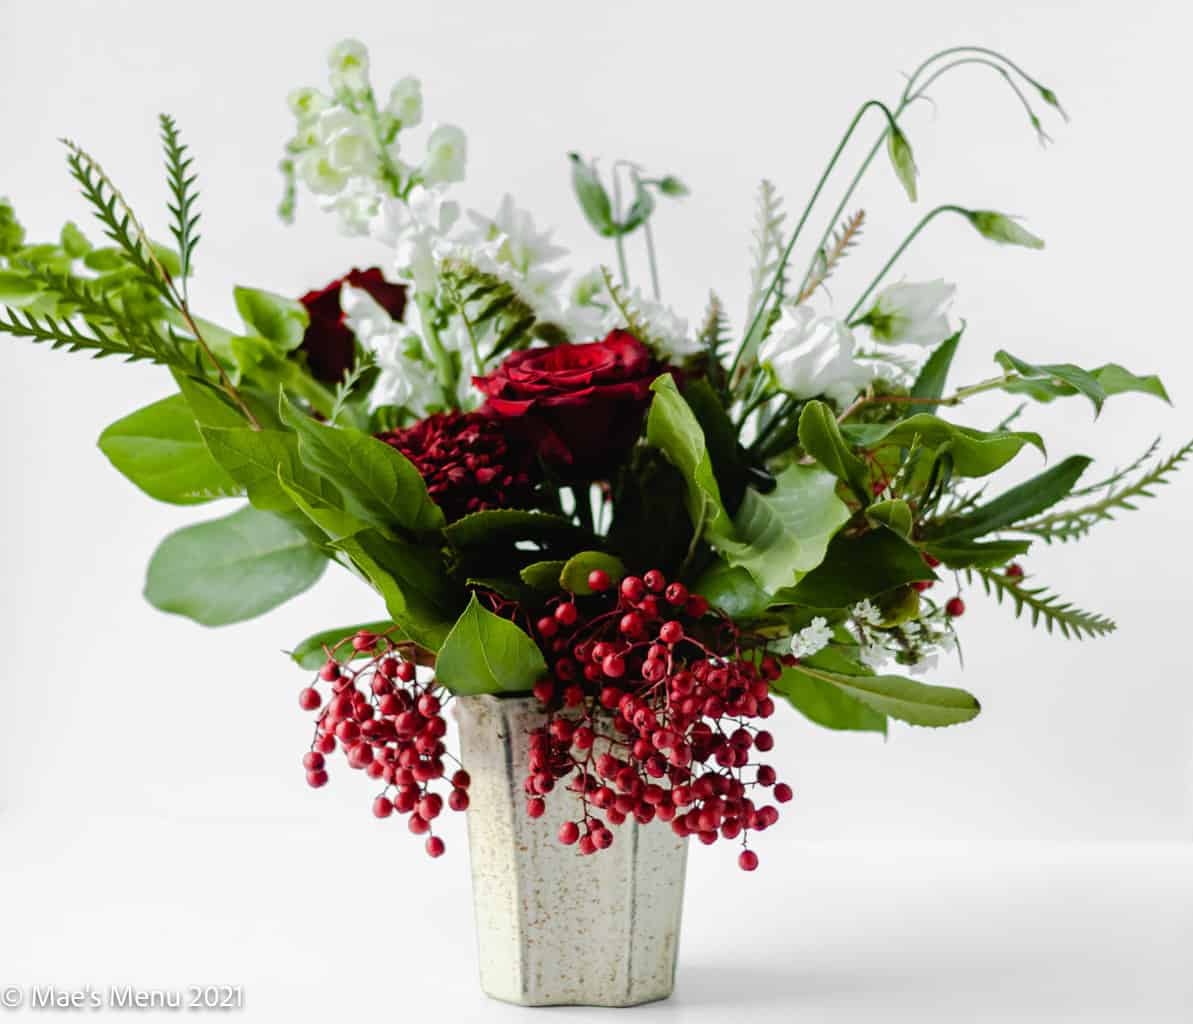 A side shot of a Christmas bouquet on a white background.